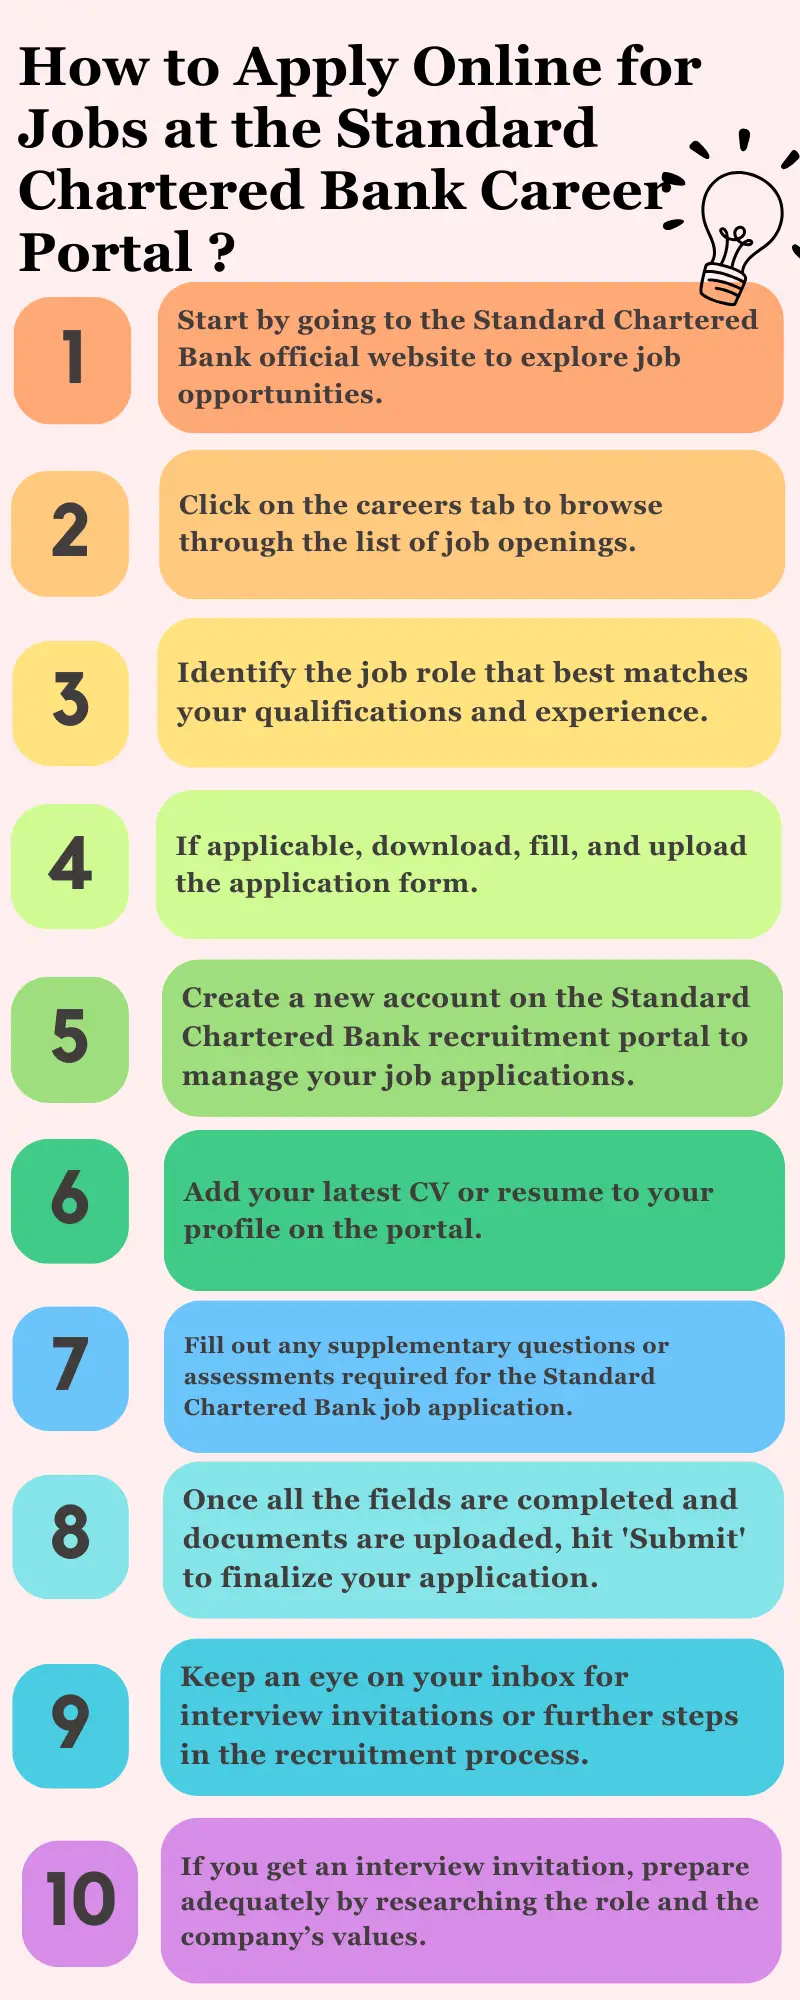 How to Apply Online for Jobs at the Standard Chartered Bank Career Portal ?